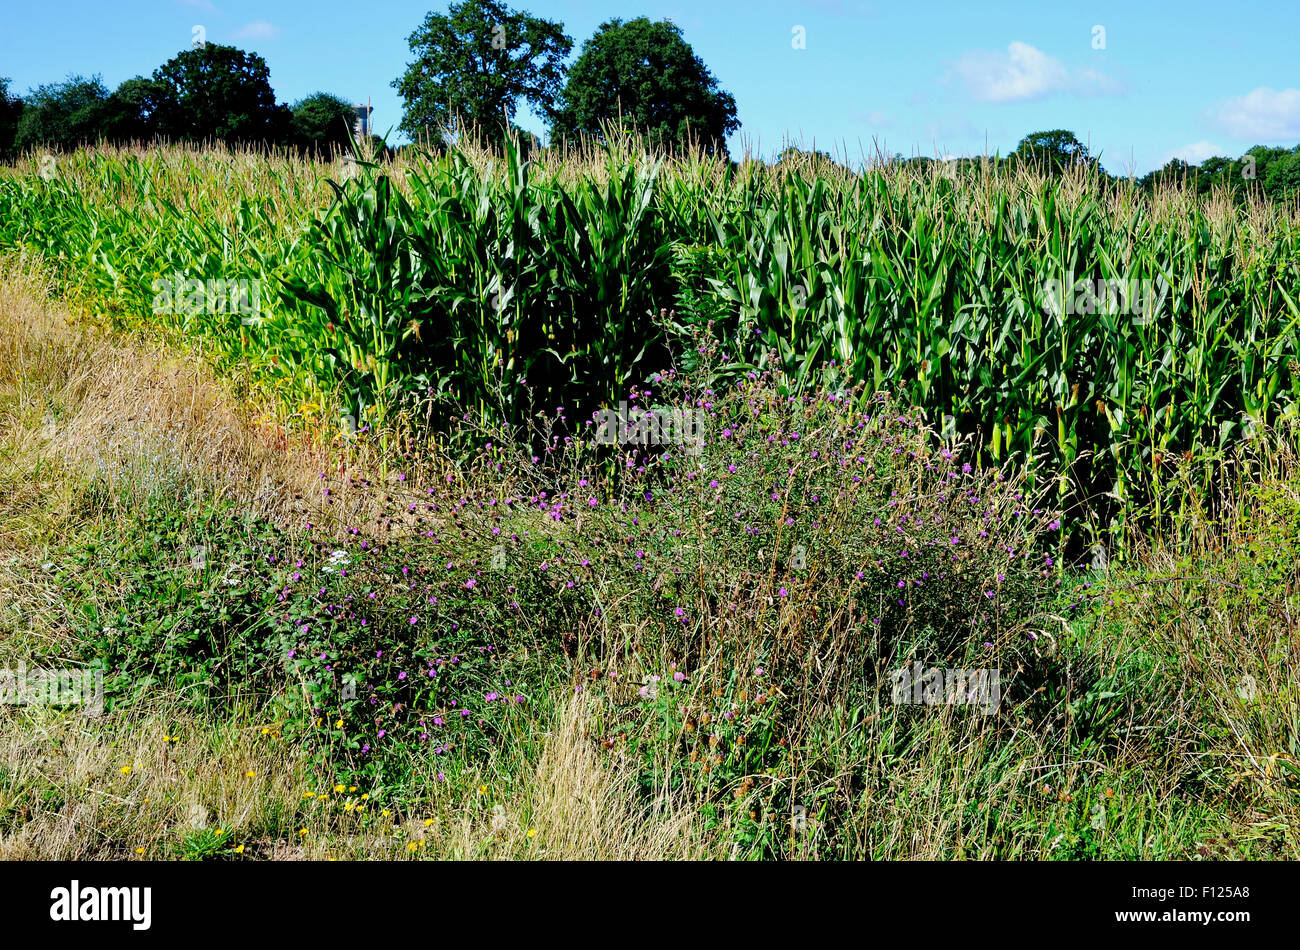 A field of maize (corn) in Basse Normandie (southern Normandy), France. Much of the crop is used as cattle feed. Stock Photo